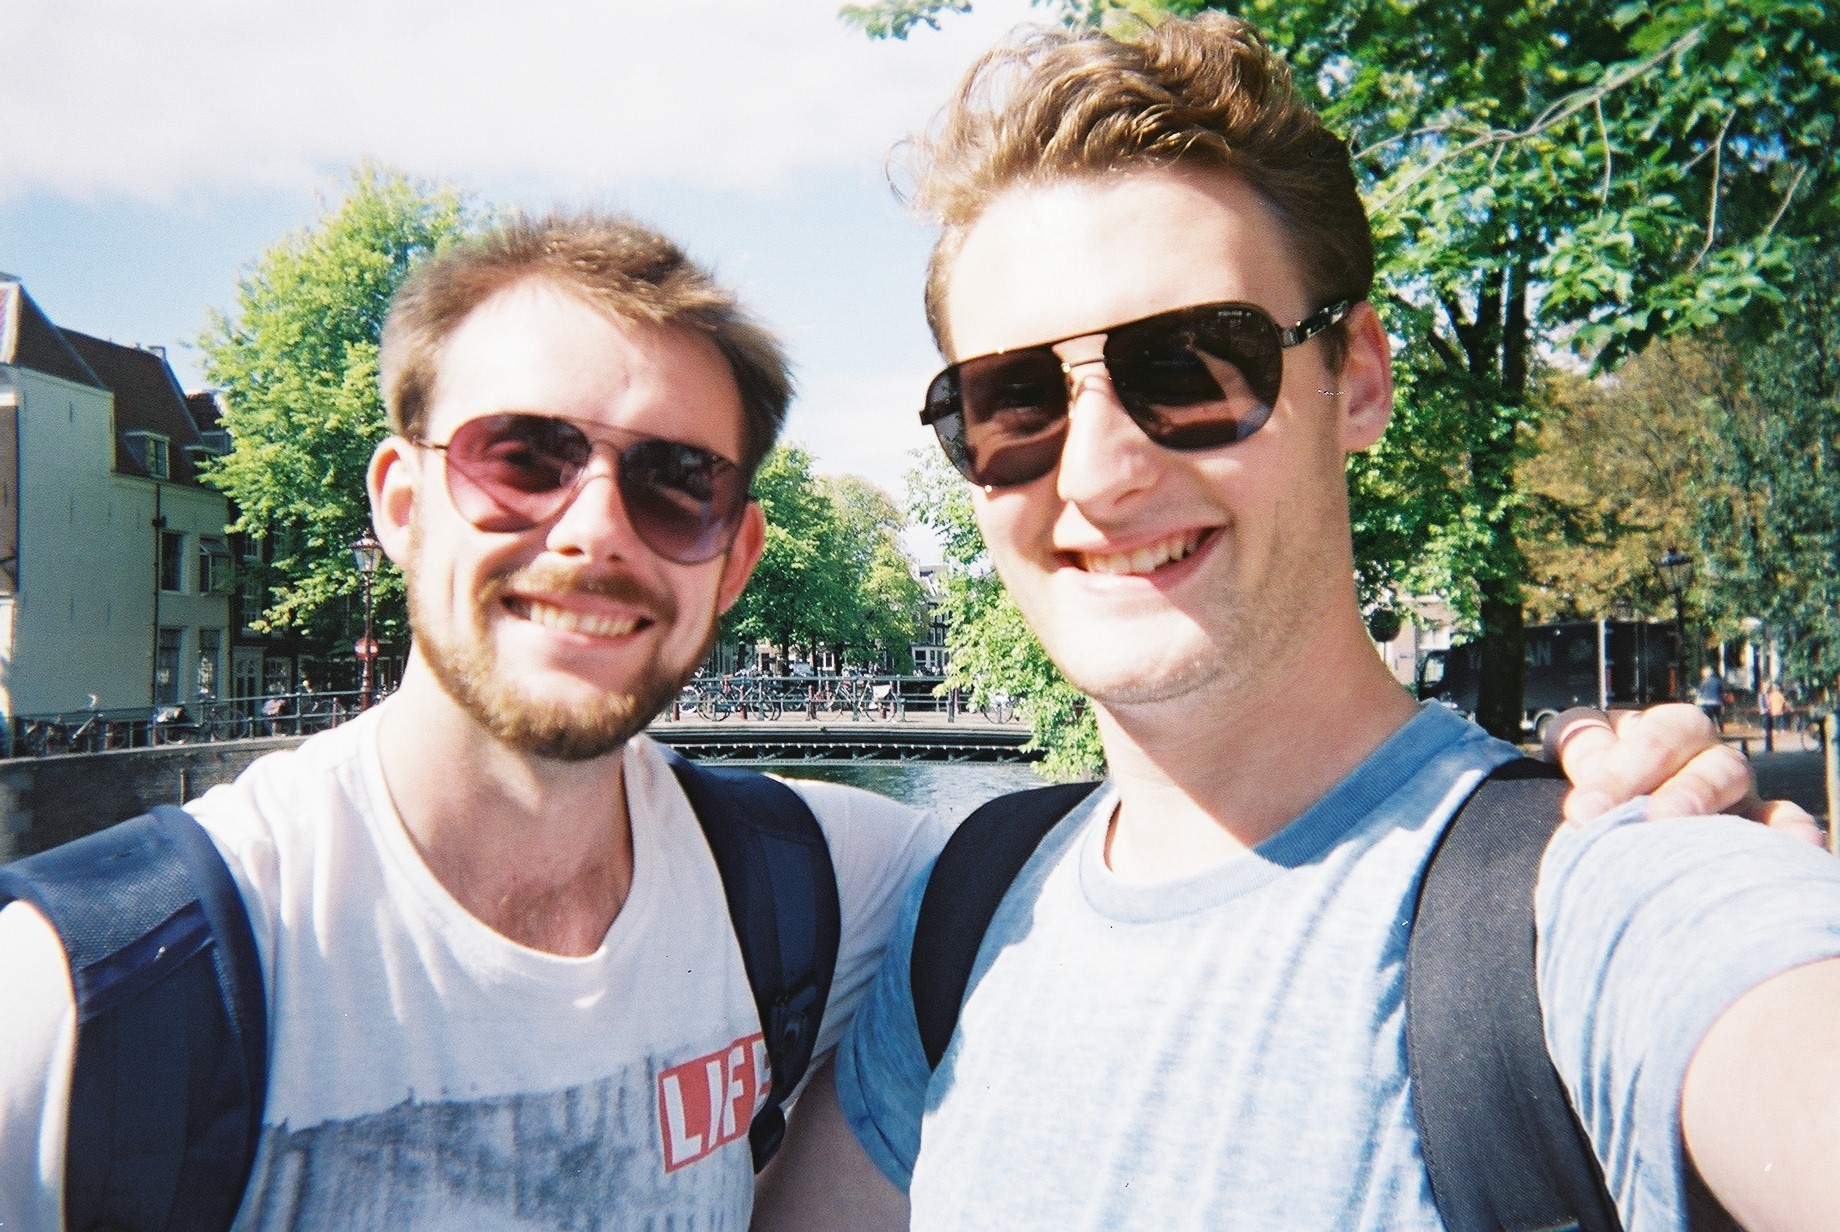 Adam and Glen 1st day in Amsterdam for IBC 2014! Taken on a disposable camera by Glen Symes.